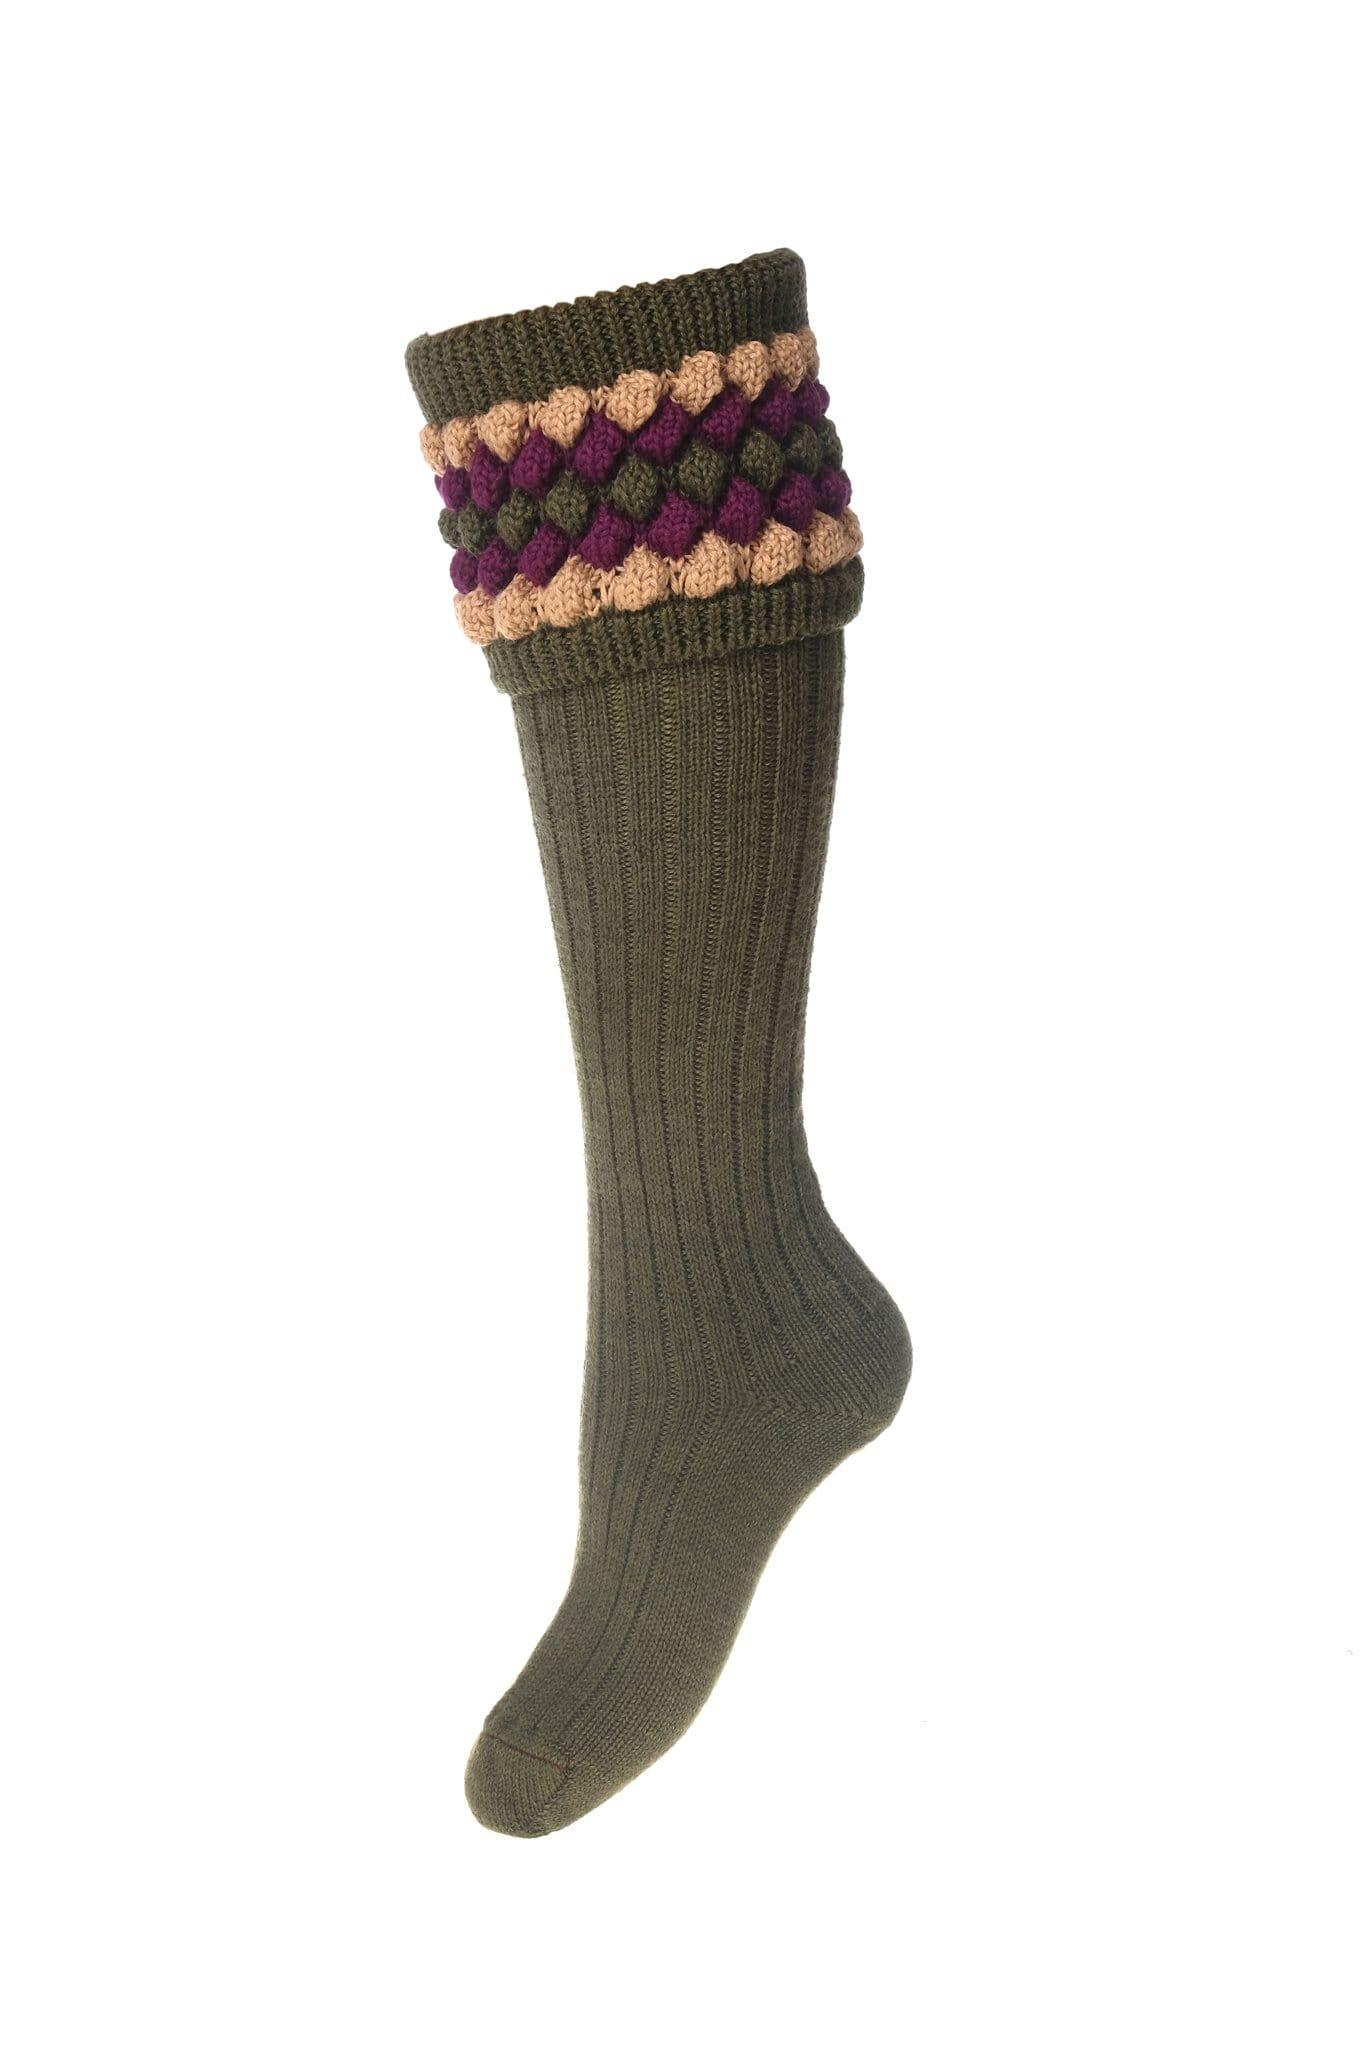 House of Cheviot Socks House of Cheviot Lady Angus Ladies Shooting Socks in Dark Olive